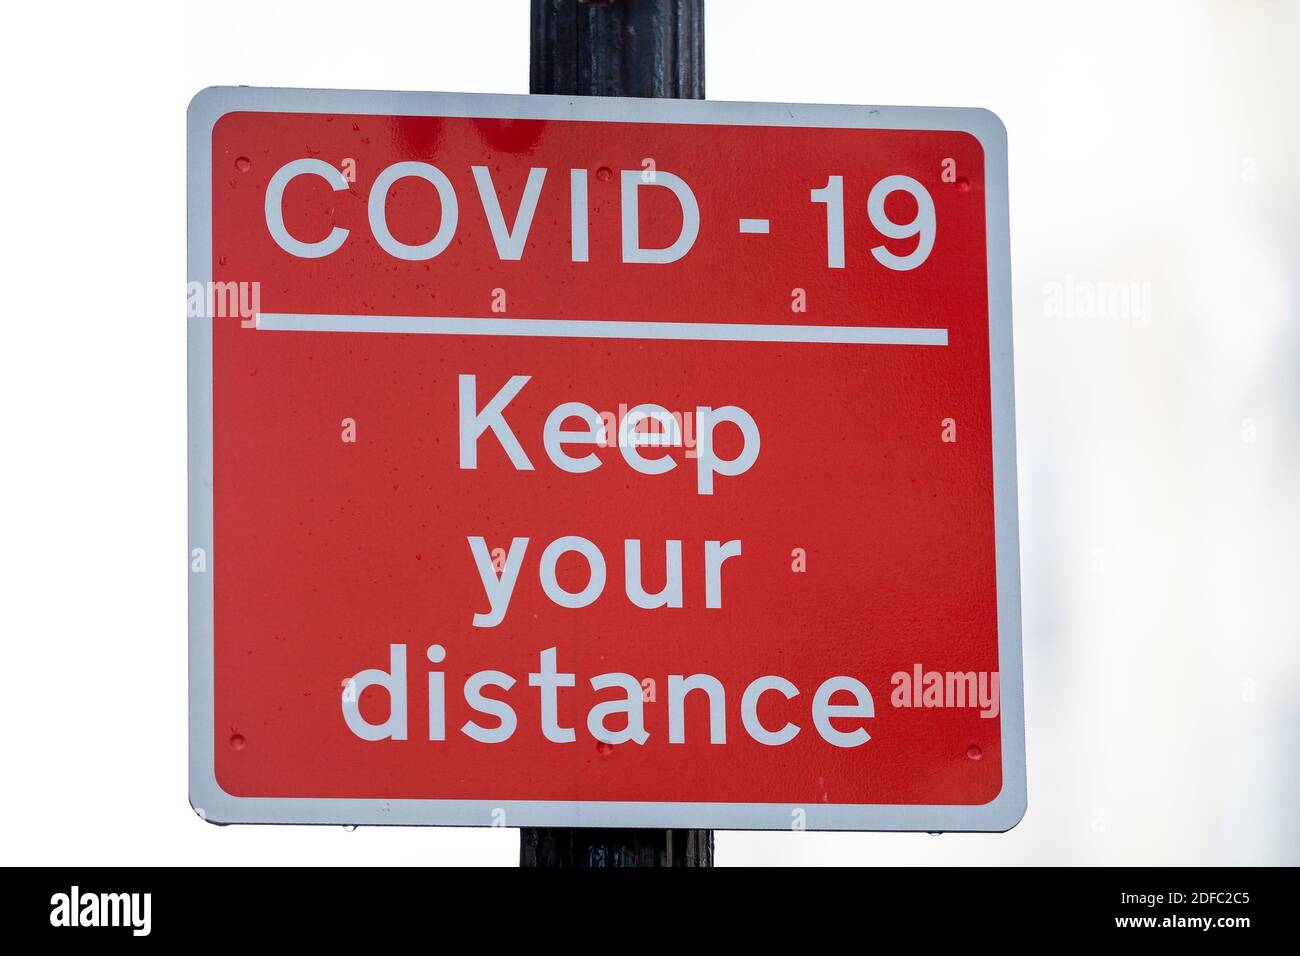 A sign reads Covid-19 Keep your distanceAn increasing number of shops to let around Brighton City Centre which is eerily quiet during the Covid-19 Lockdown 2.0.  Normally with just weeks before Christmas the lanes would be busy with people purchasing gifts for loved ones. Stock Photo